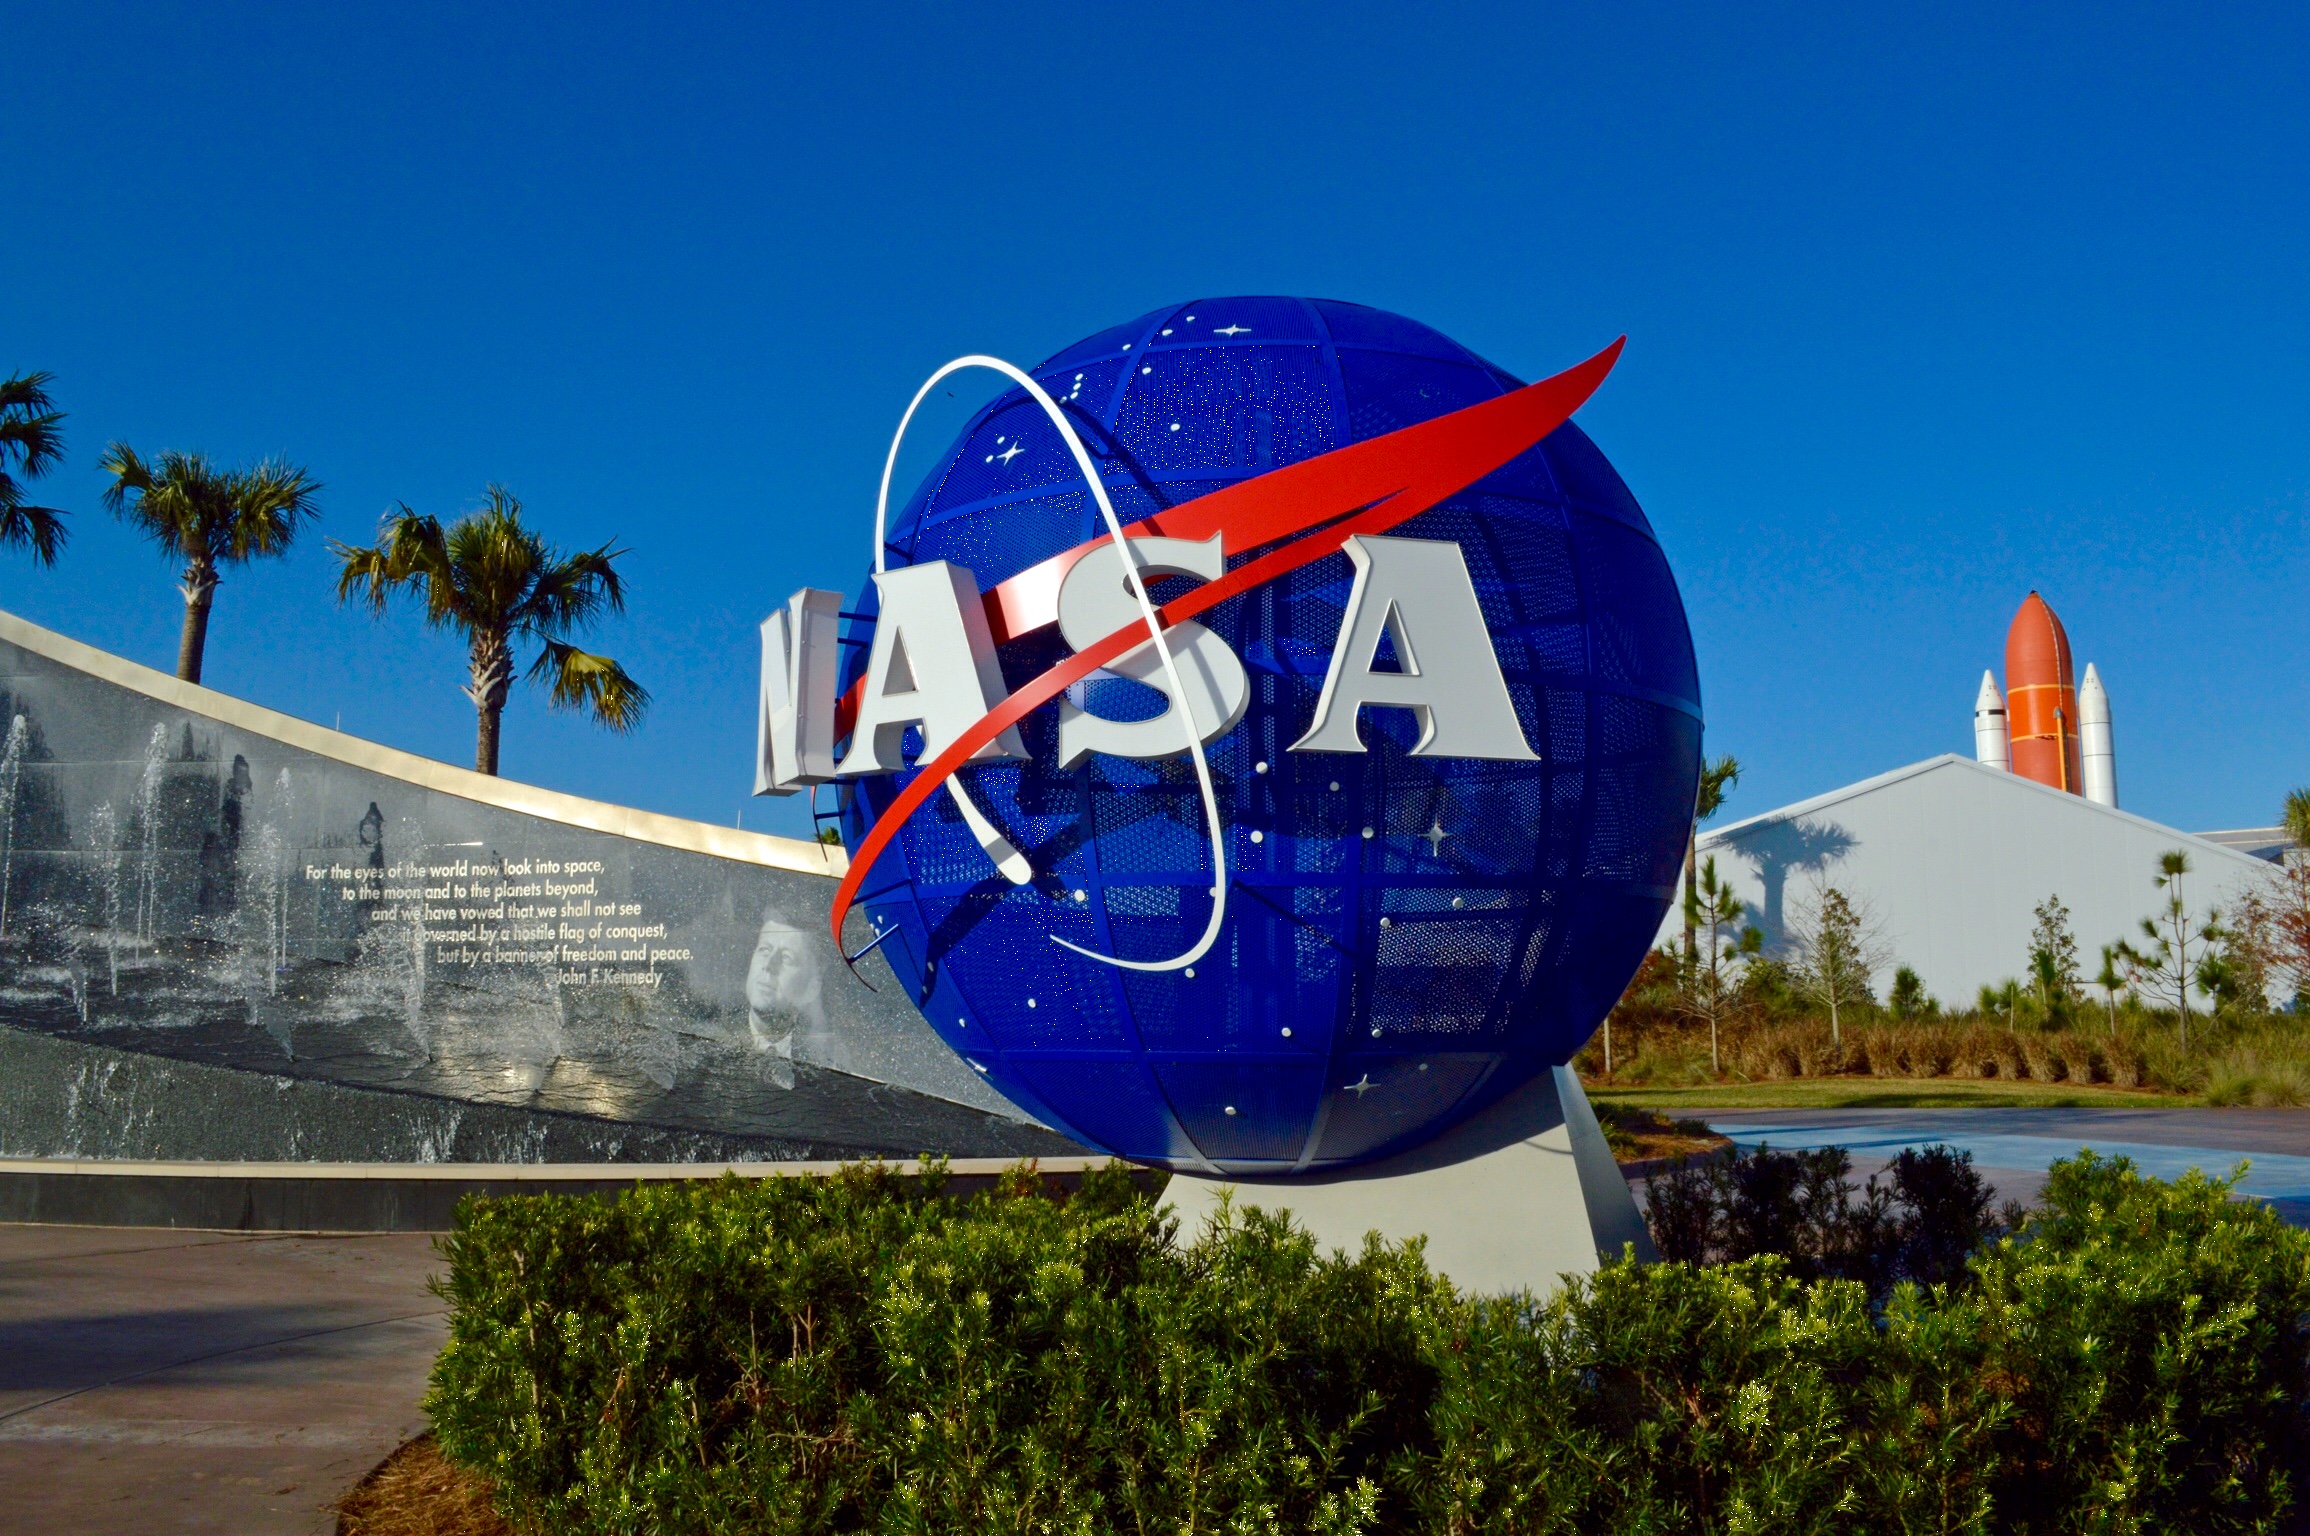 NASA logo is seen at the Kennedy Space Center in Florida. (Images Etc Ltd/Getty Images)